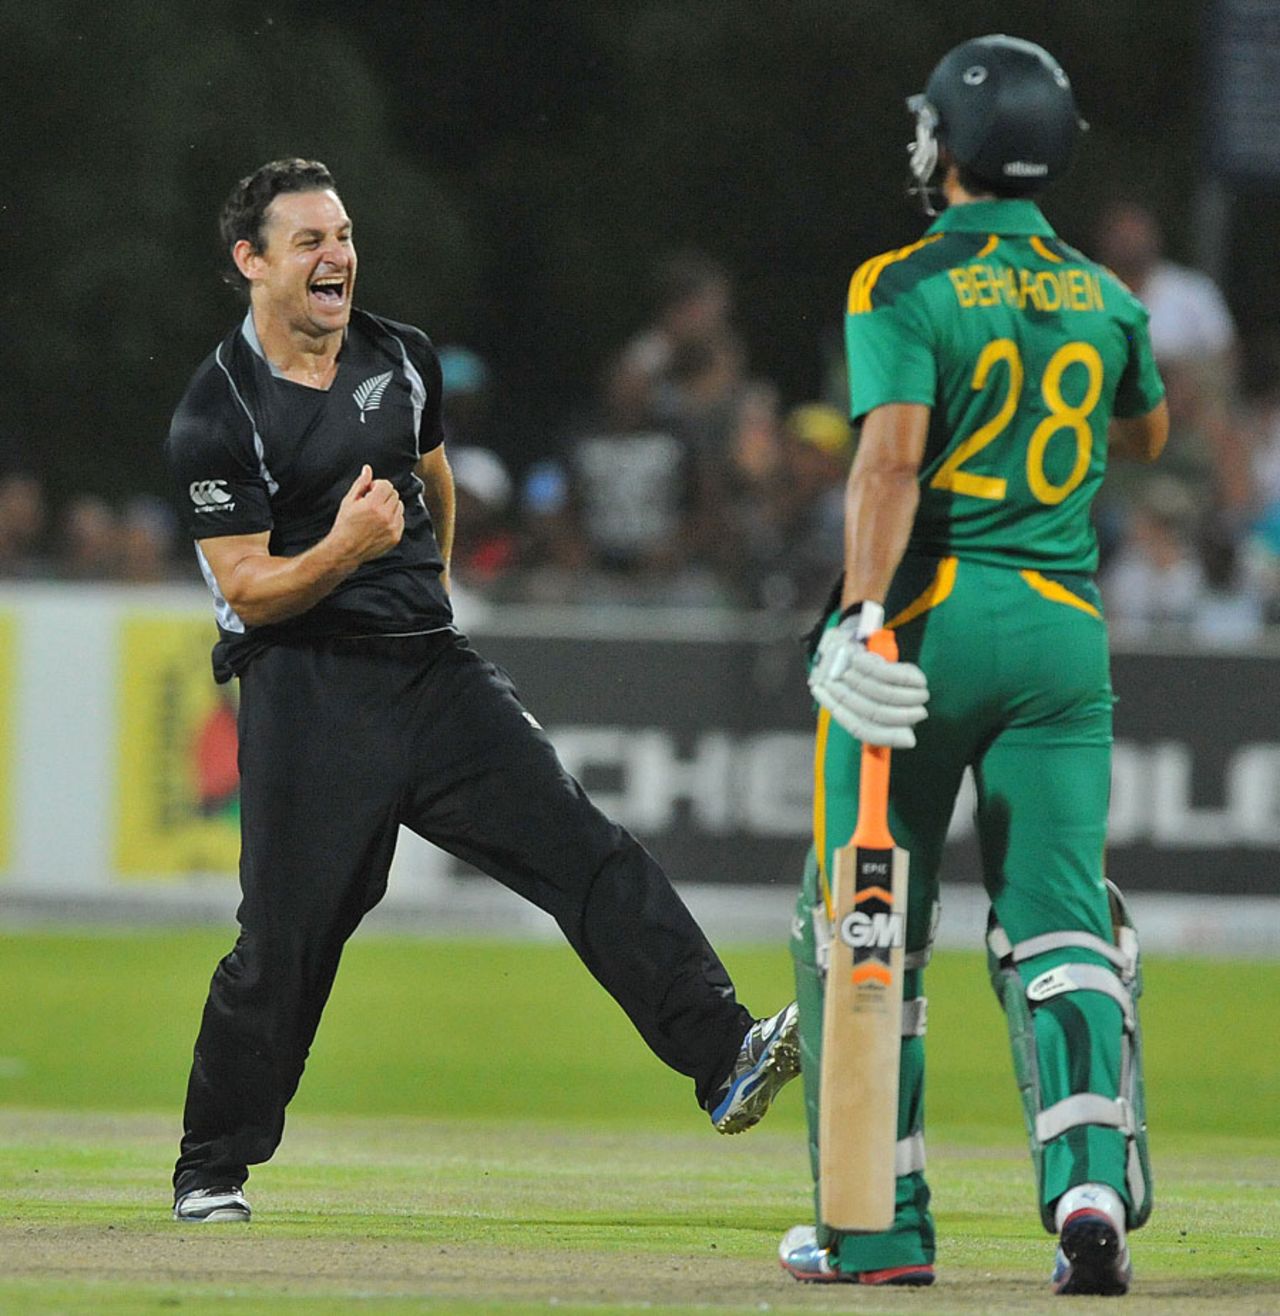 Nathan McCullum enjoys another wicket, South Africa v New Zealand, 2nd ODI, Kimberley, January 22, 2013